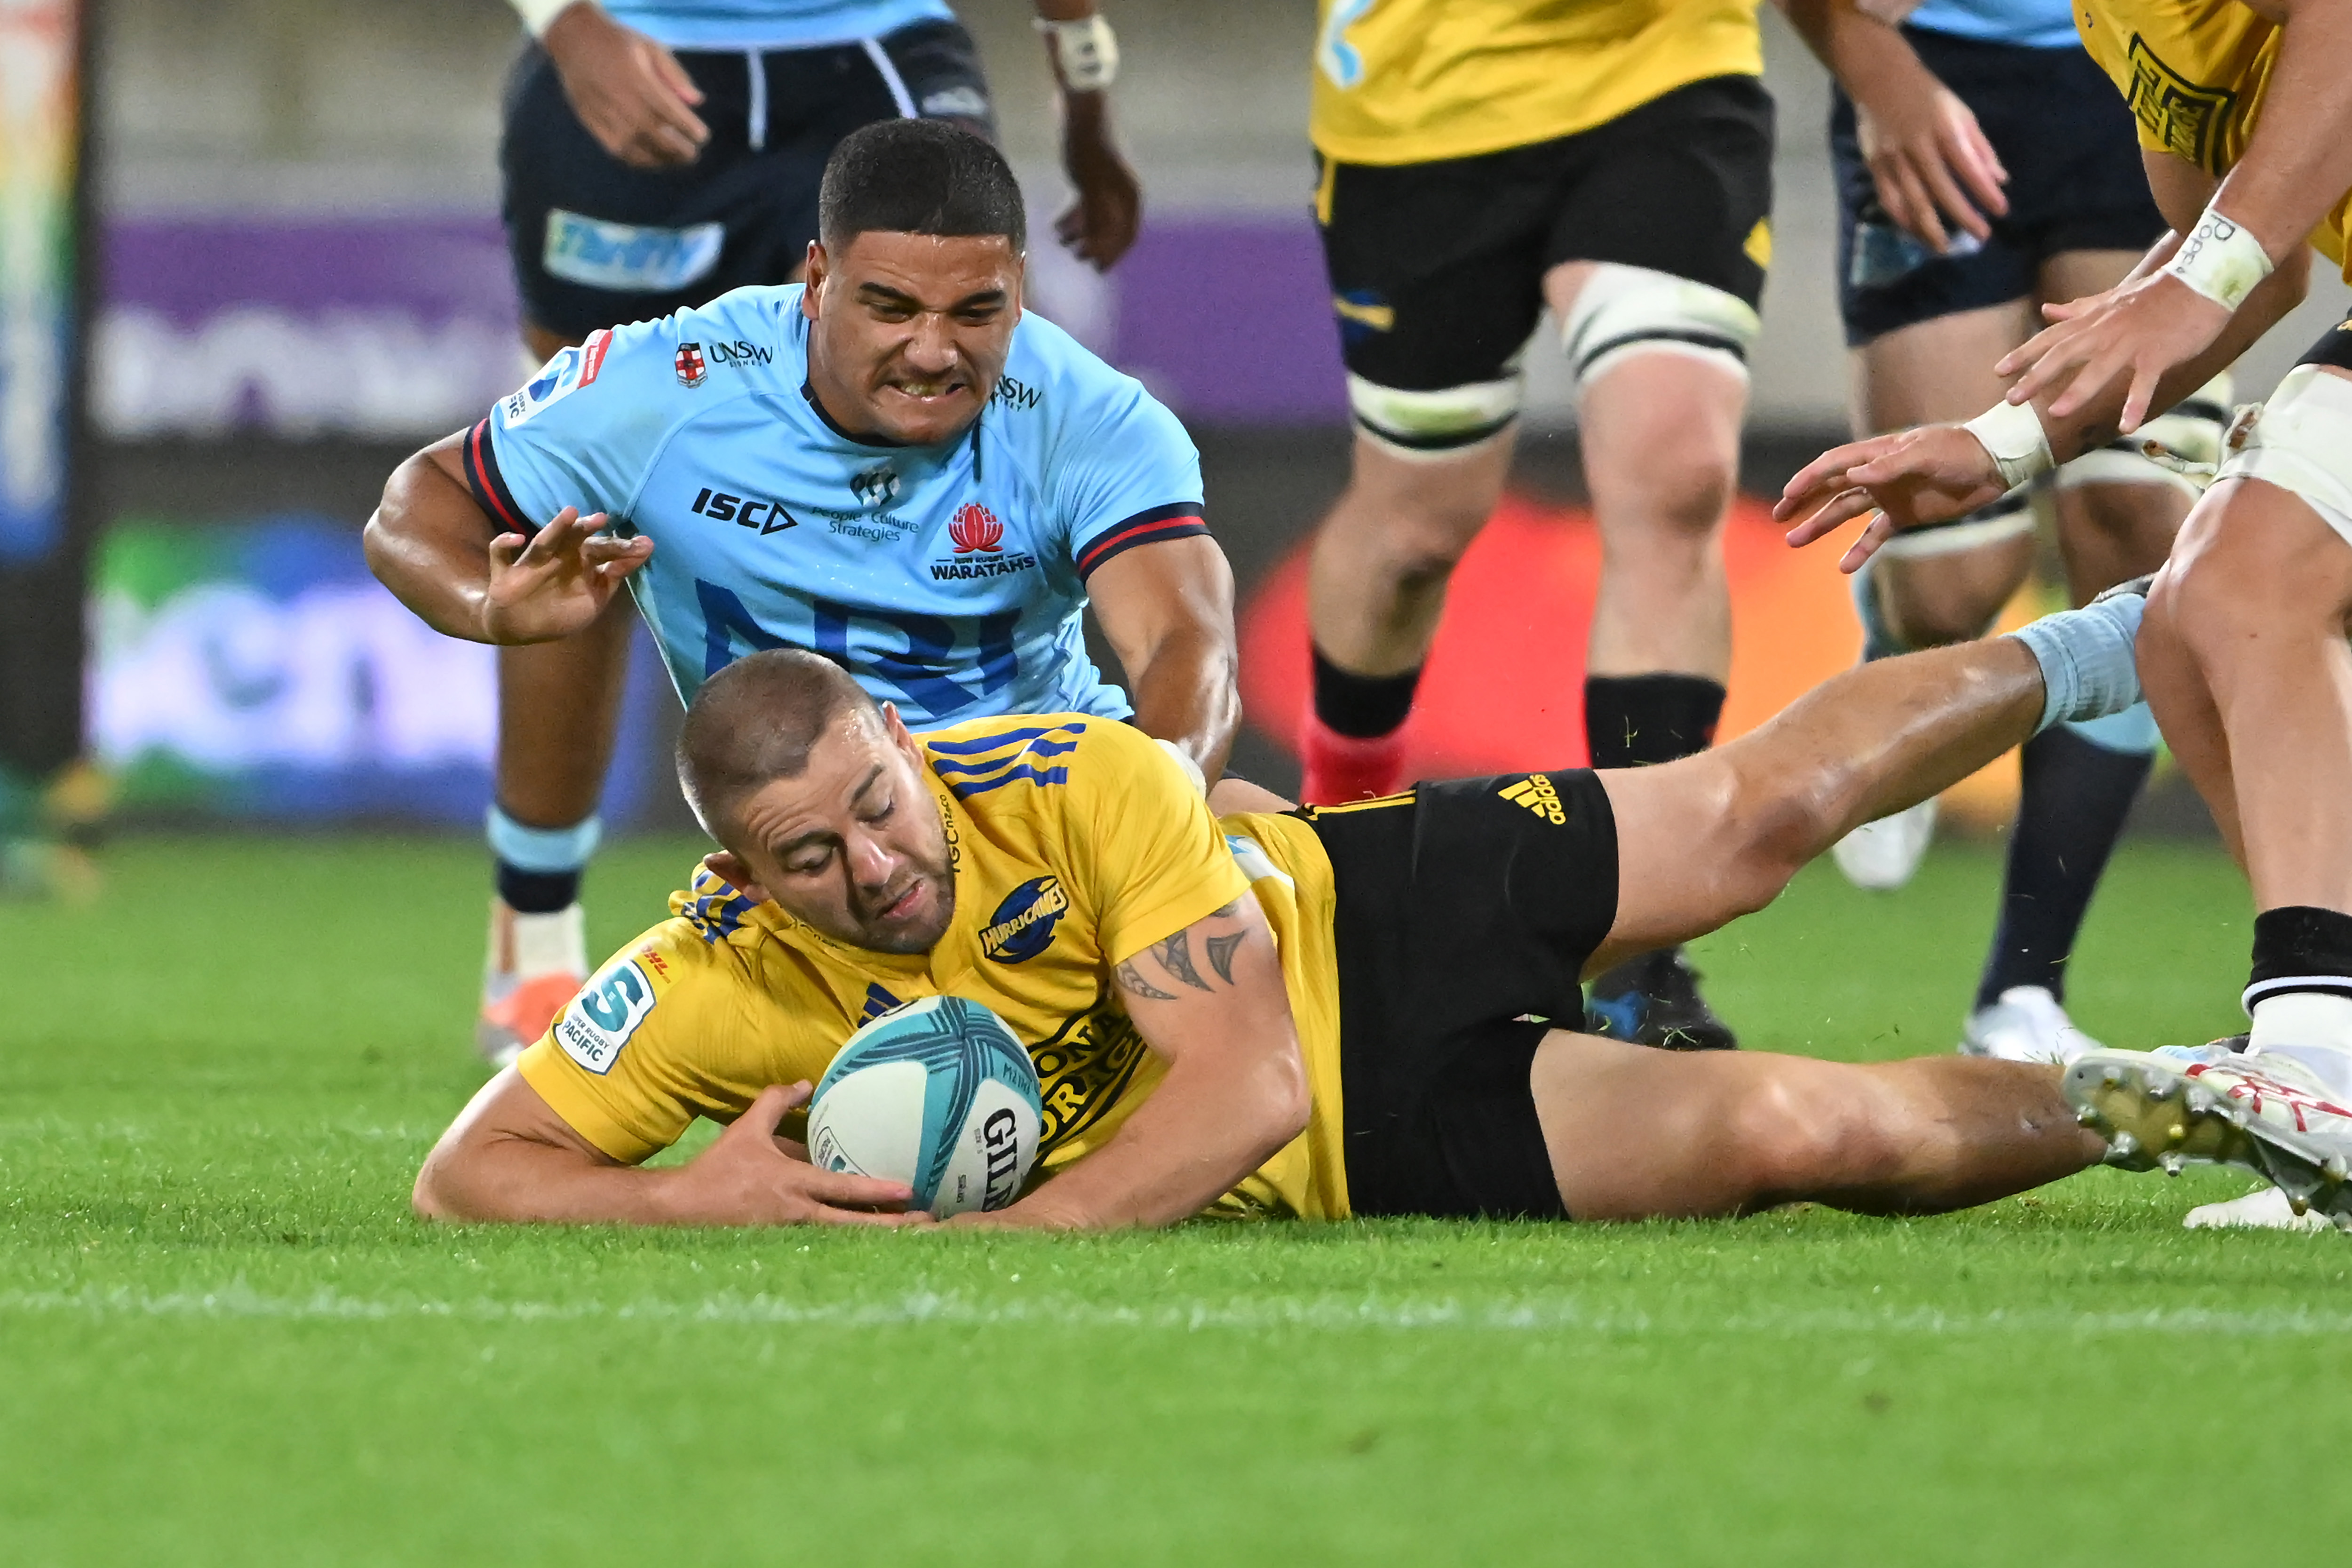 Dane Coles of the Hurricanes and Mosese Tuipulotu of the Waratahs compete for loose ball.